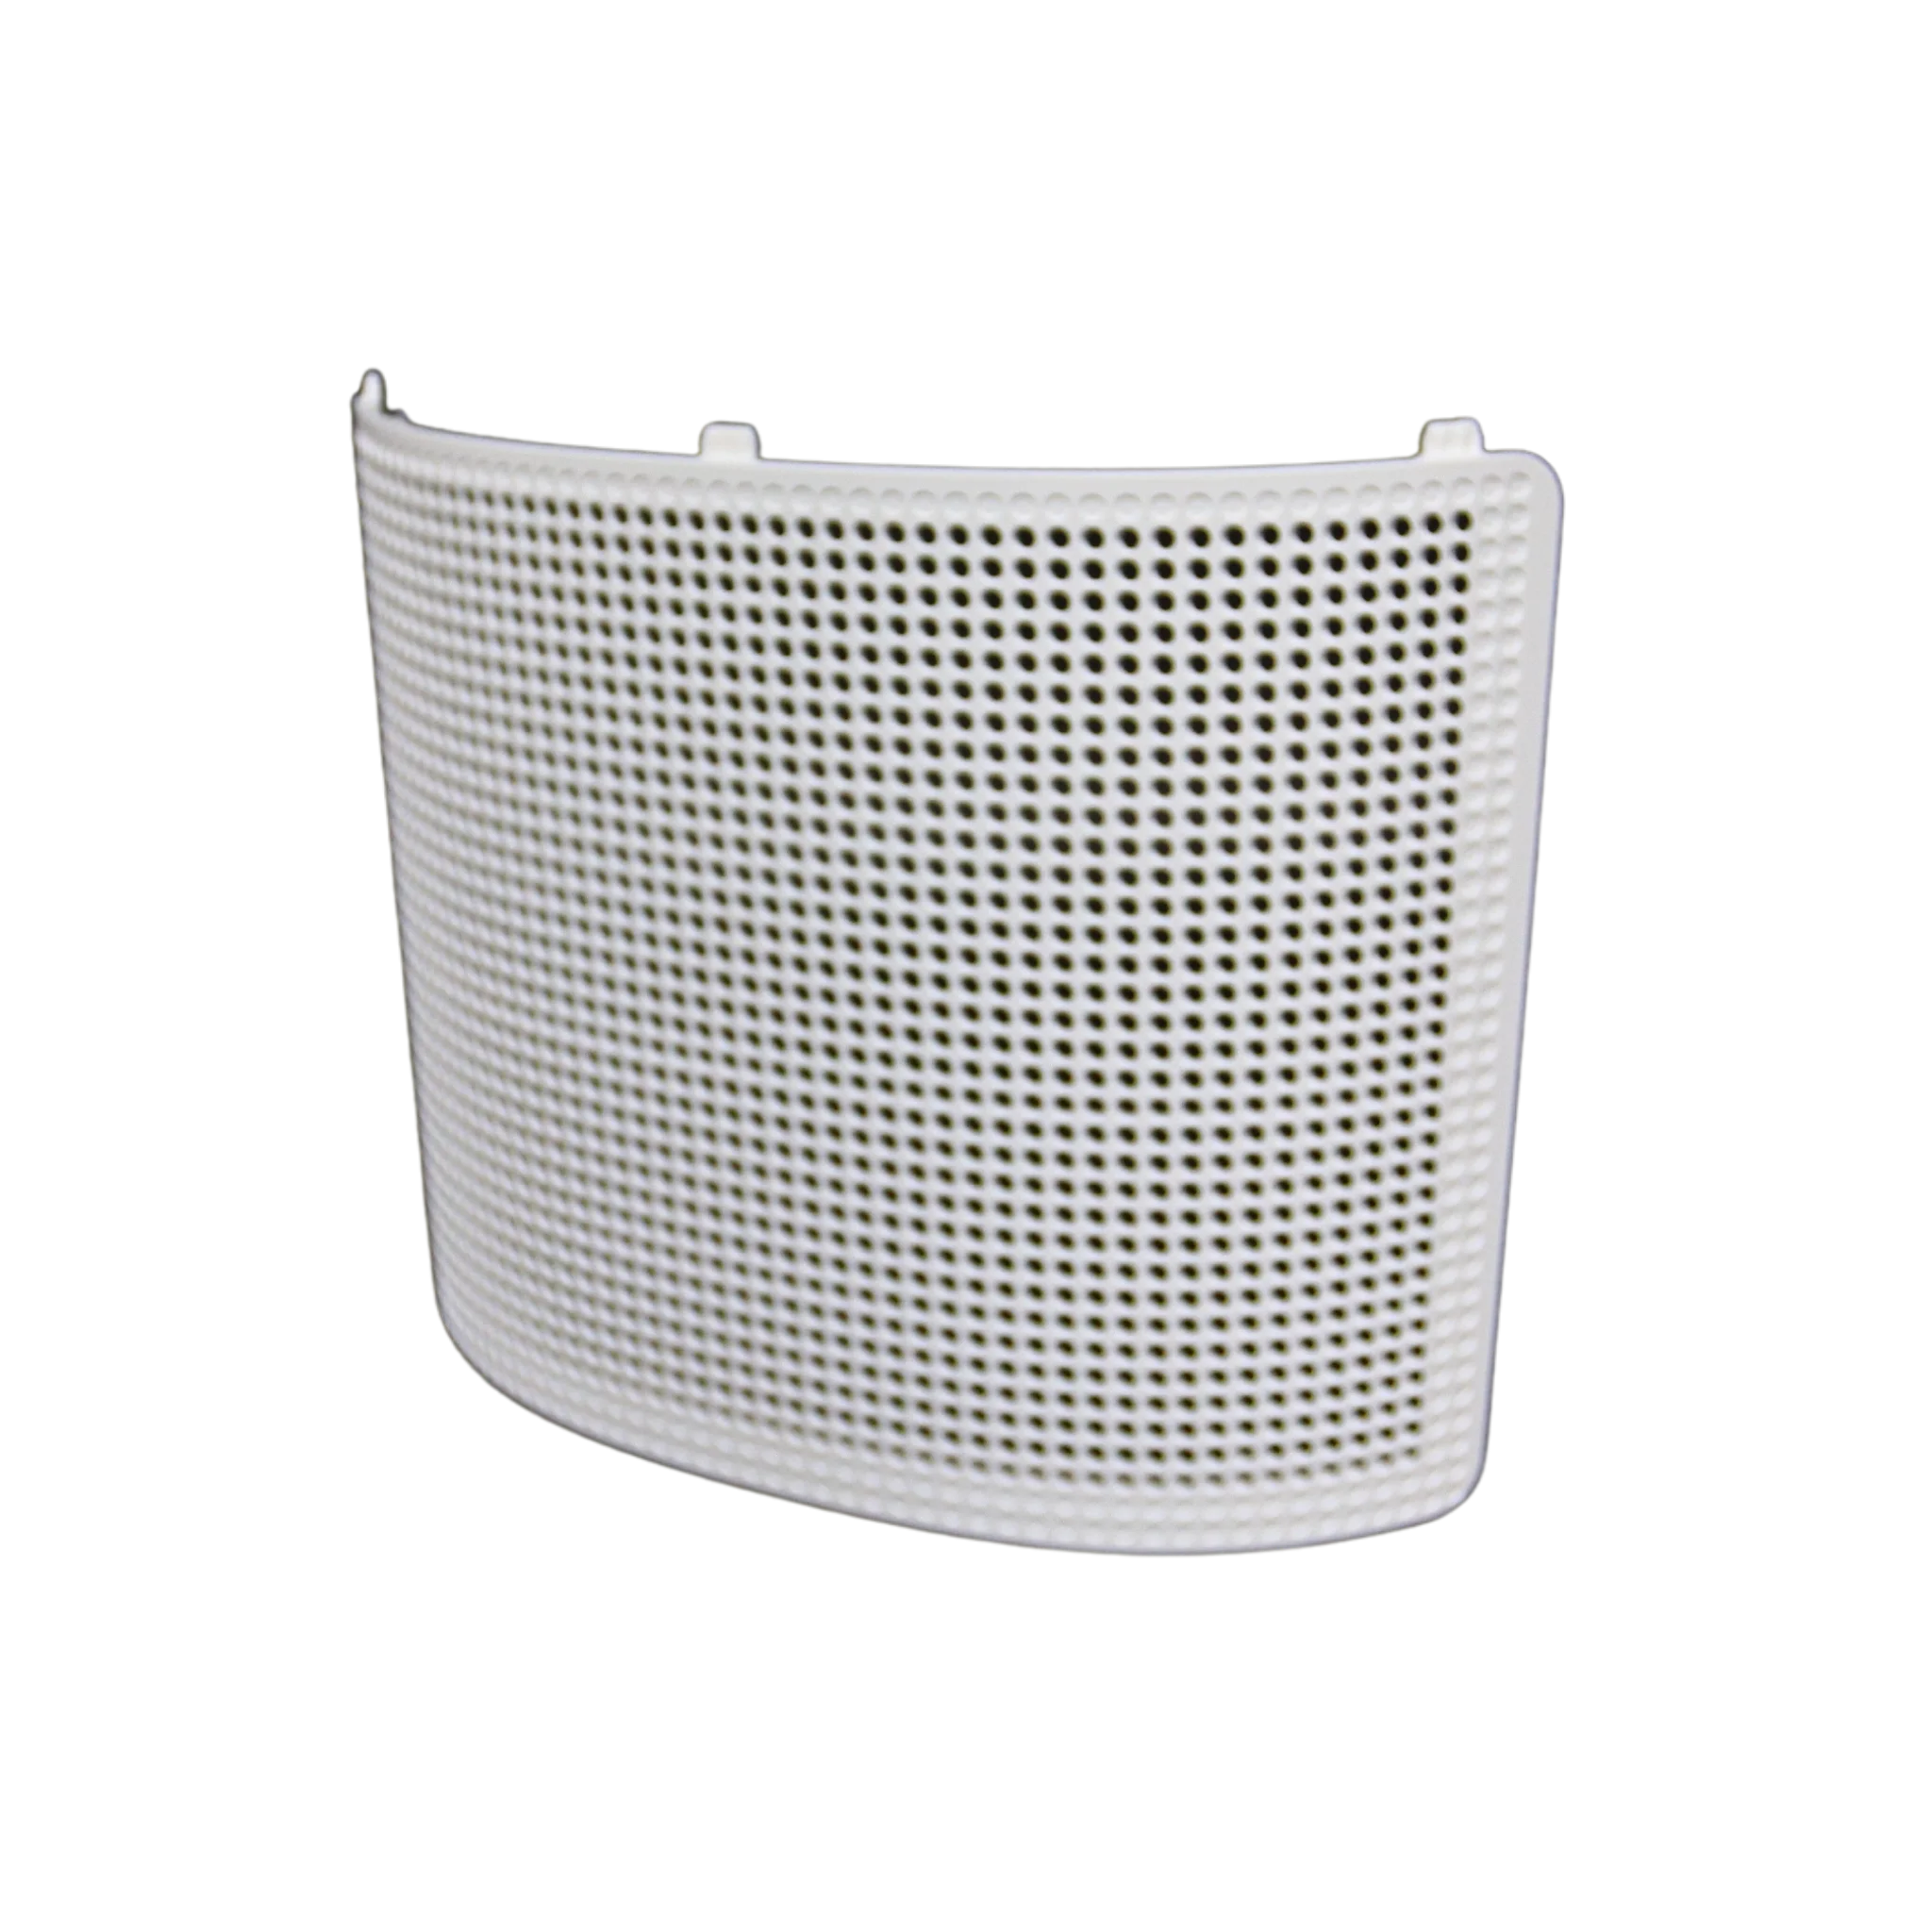 A photo of the free dust filter with an all white design and organized extraction holes to assist dust collection.